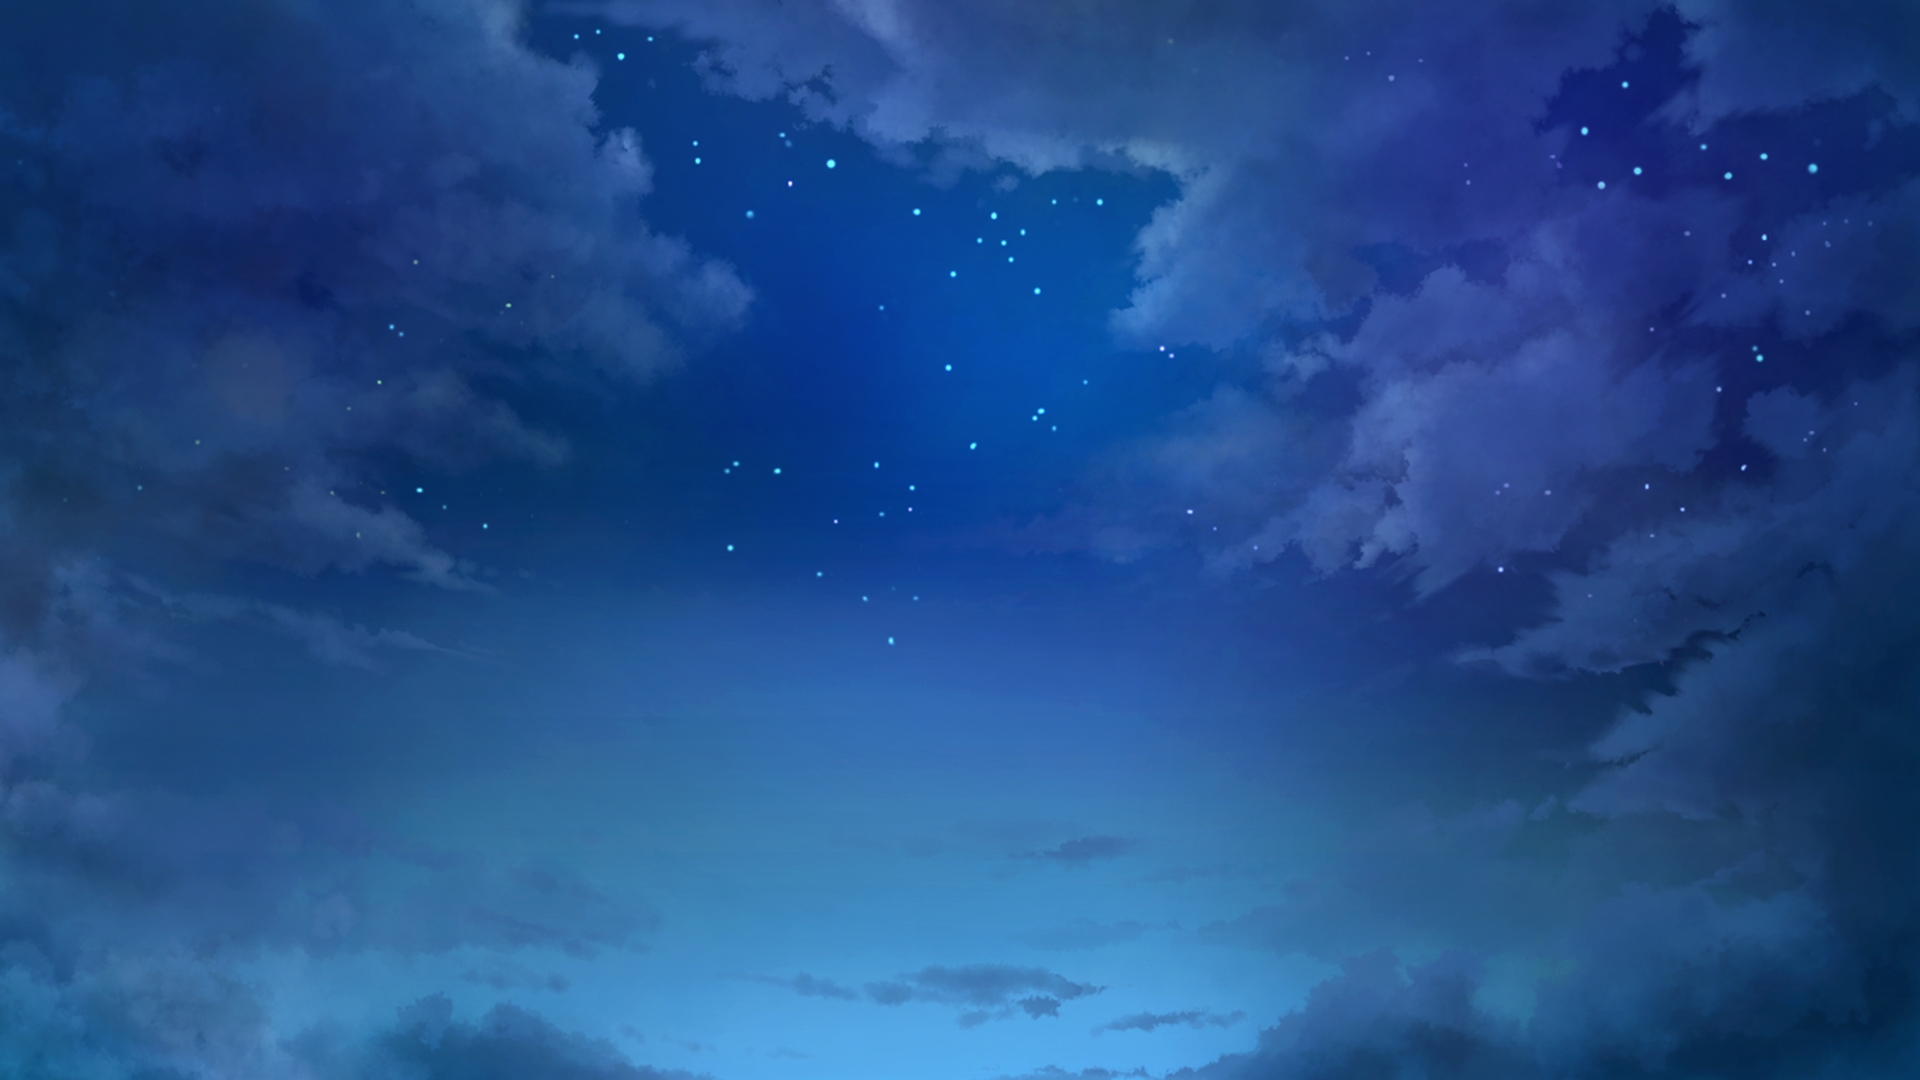 Anime Landscape: Cute Anime Landscape Of A Starry Night Sky With Some